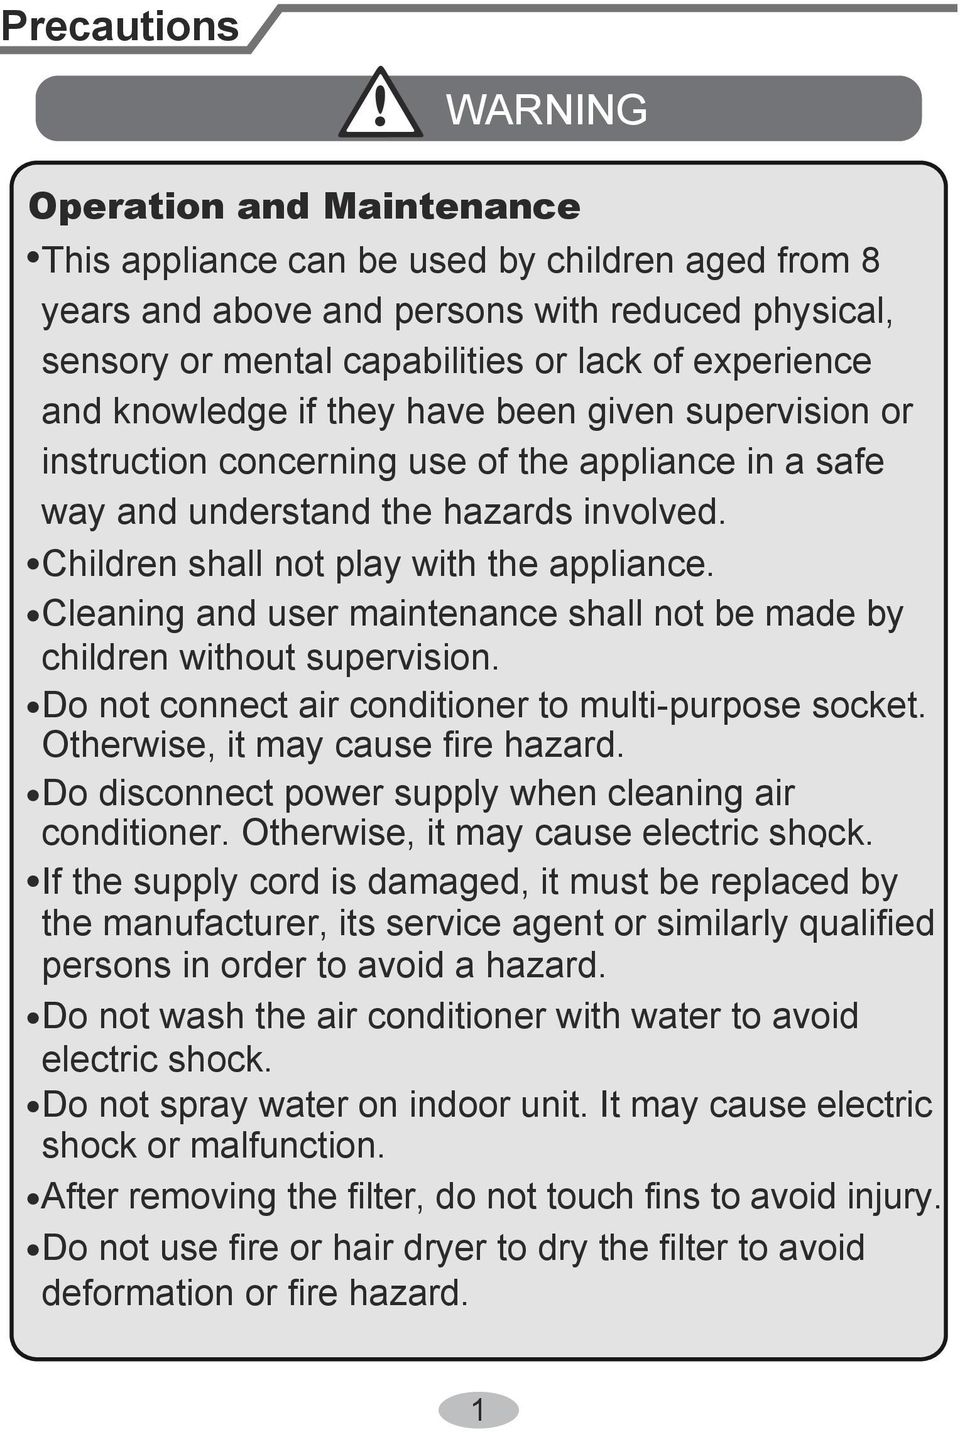 Children shall not play with the appliance. Cleaning and user maintenance shall not be made by children without supervision. Do not connect air conditioner to multi-purpose socket.